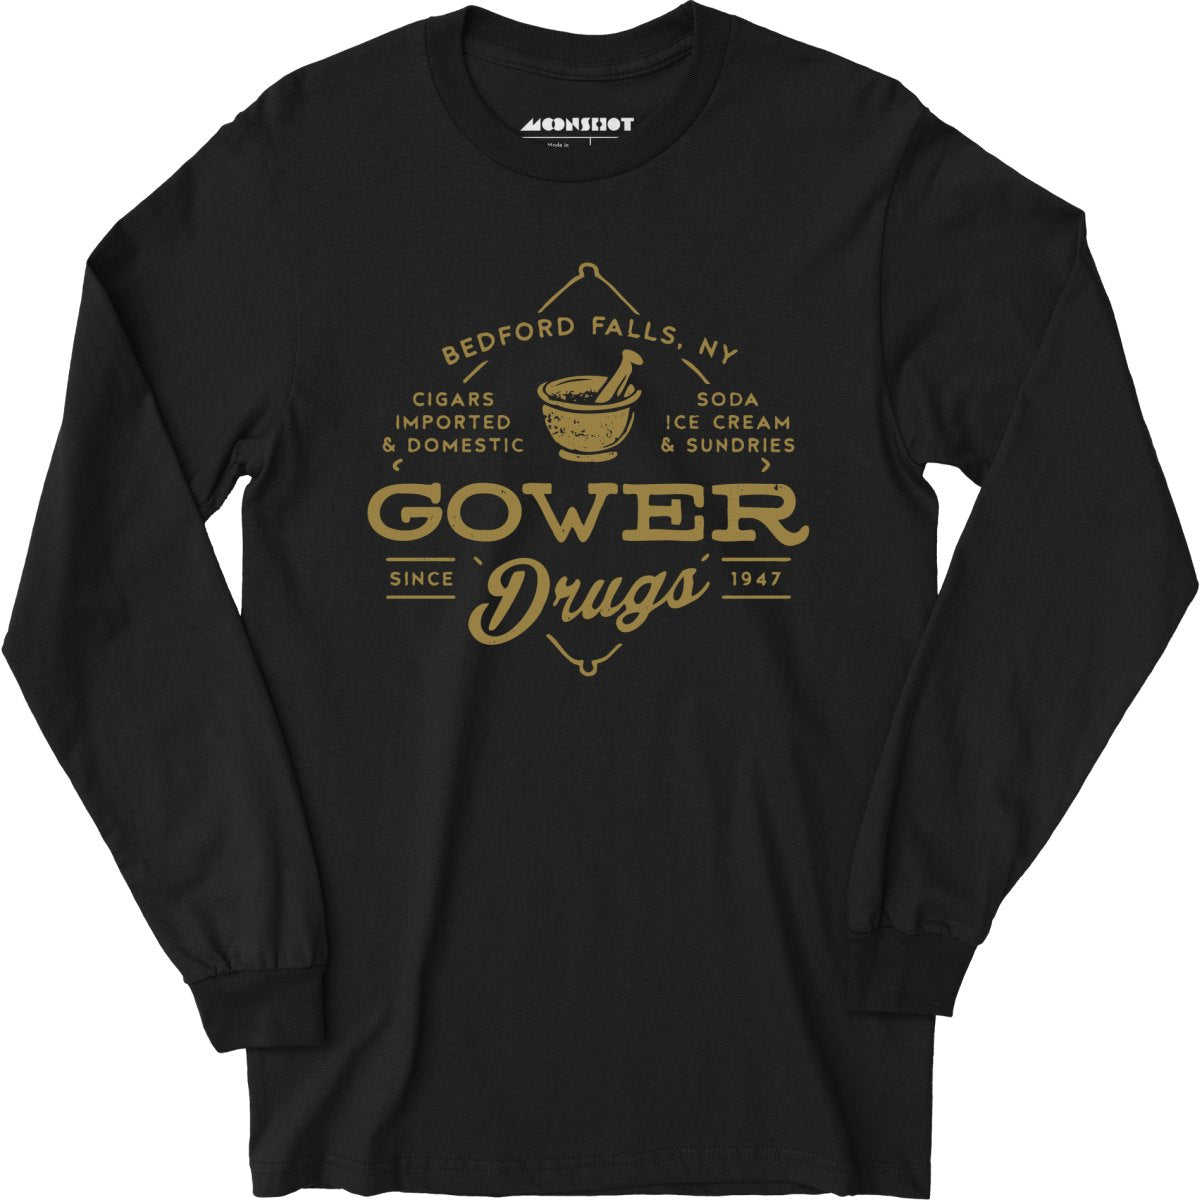 Gower Drugs - Bedford Falls, NY - Long Sleeve T-Shirt